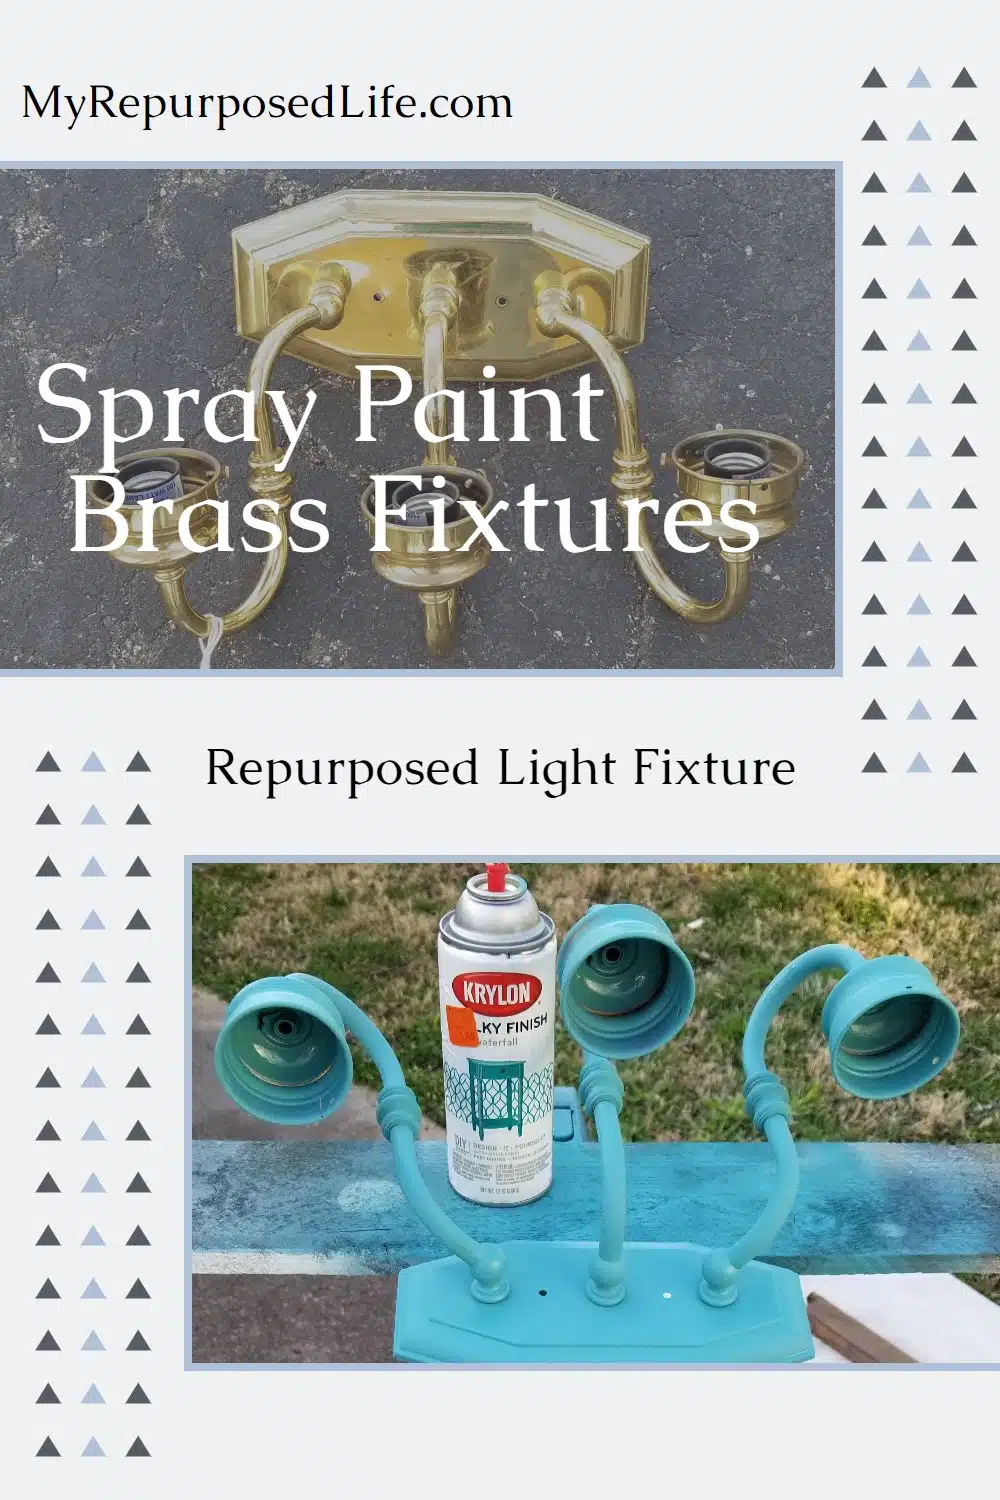 Thrifted brass vanity light gets a new look with spray paint. It even gets a new purpose as a solar light sconce for a backyard camper retreat. What a great way to add color and lighting. Choosing the right solar lights has proven to be a challenge, but I will win out in the end! #MyRepurposedLife #brass #light #repurposed #spraypaint #solar via @repurposedlife